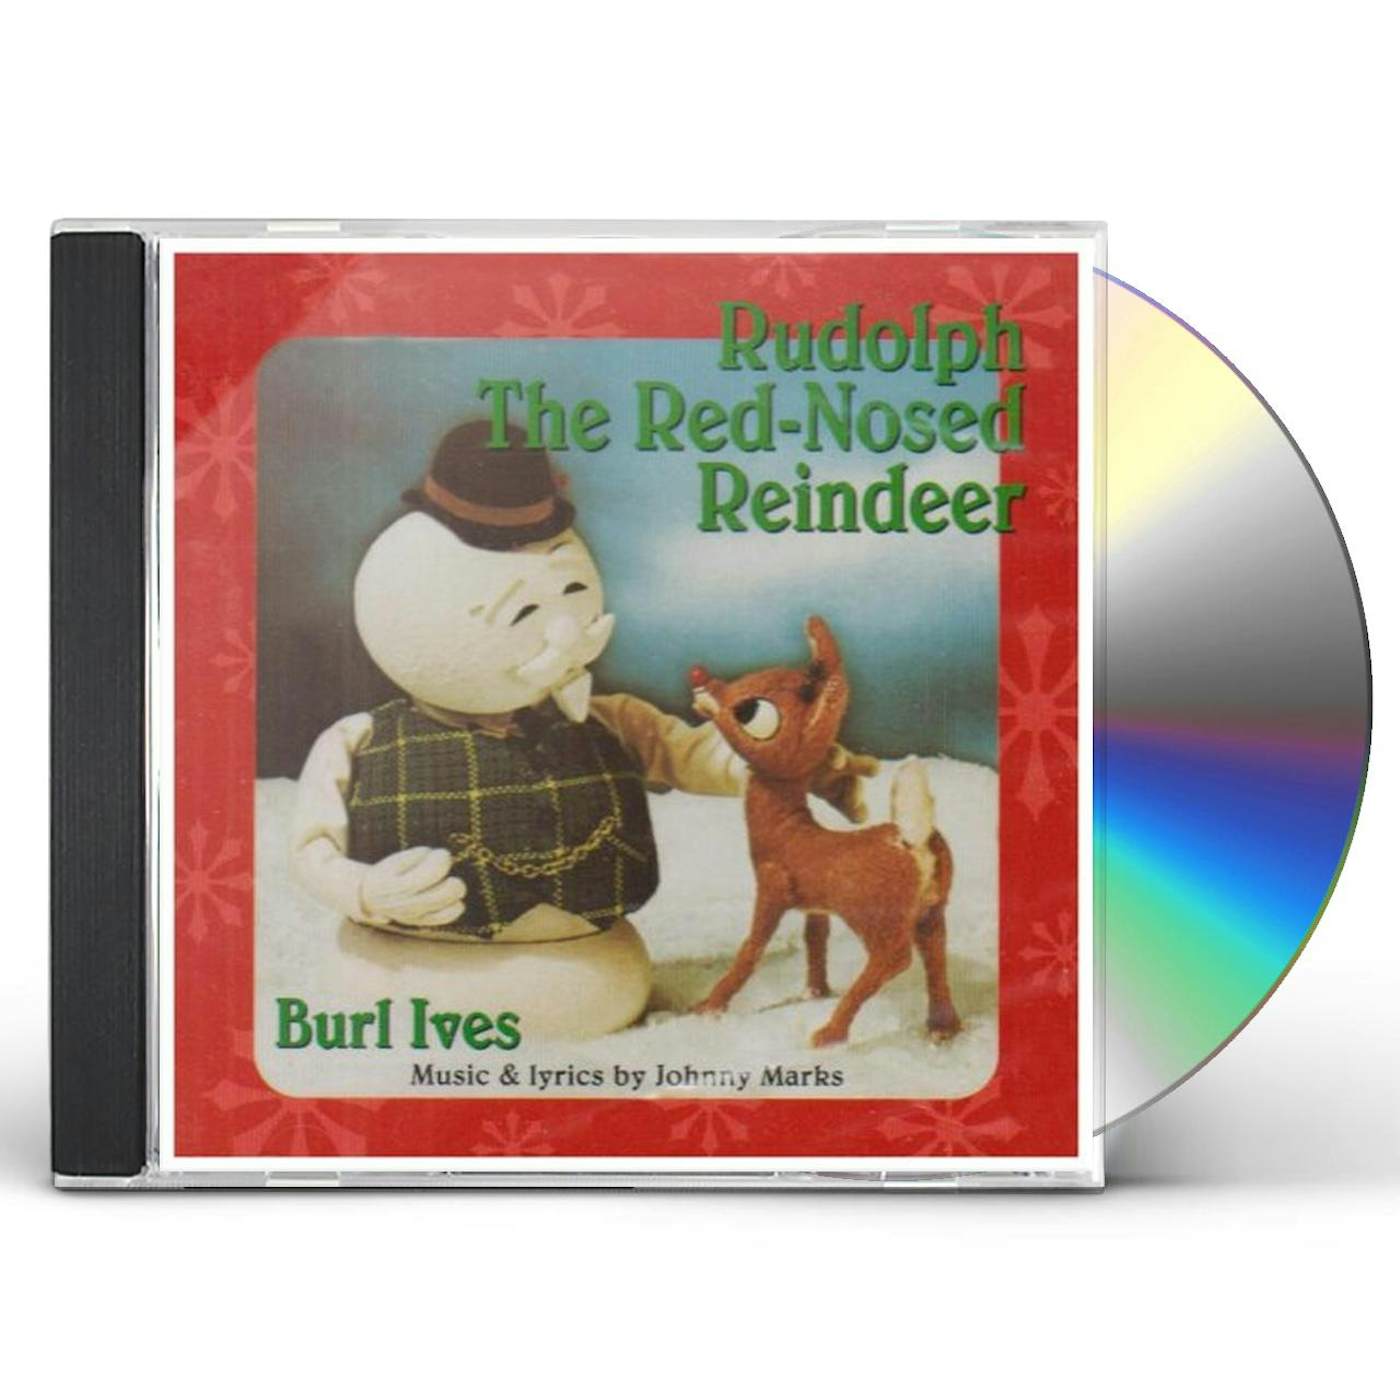 Burl Ives RUDOLPH THE RED-NOSED REINDEER CD